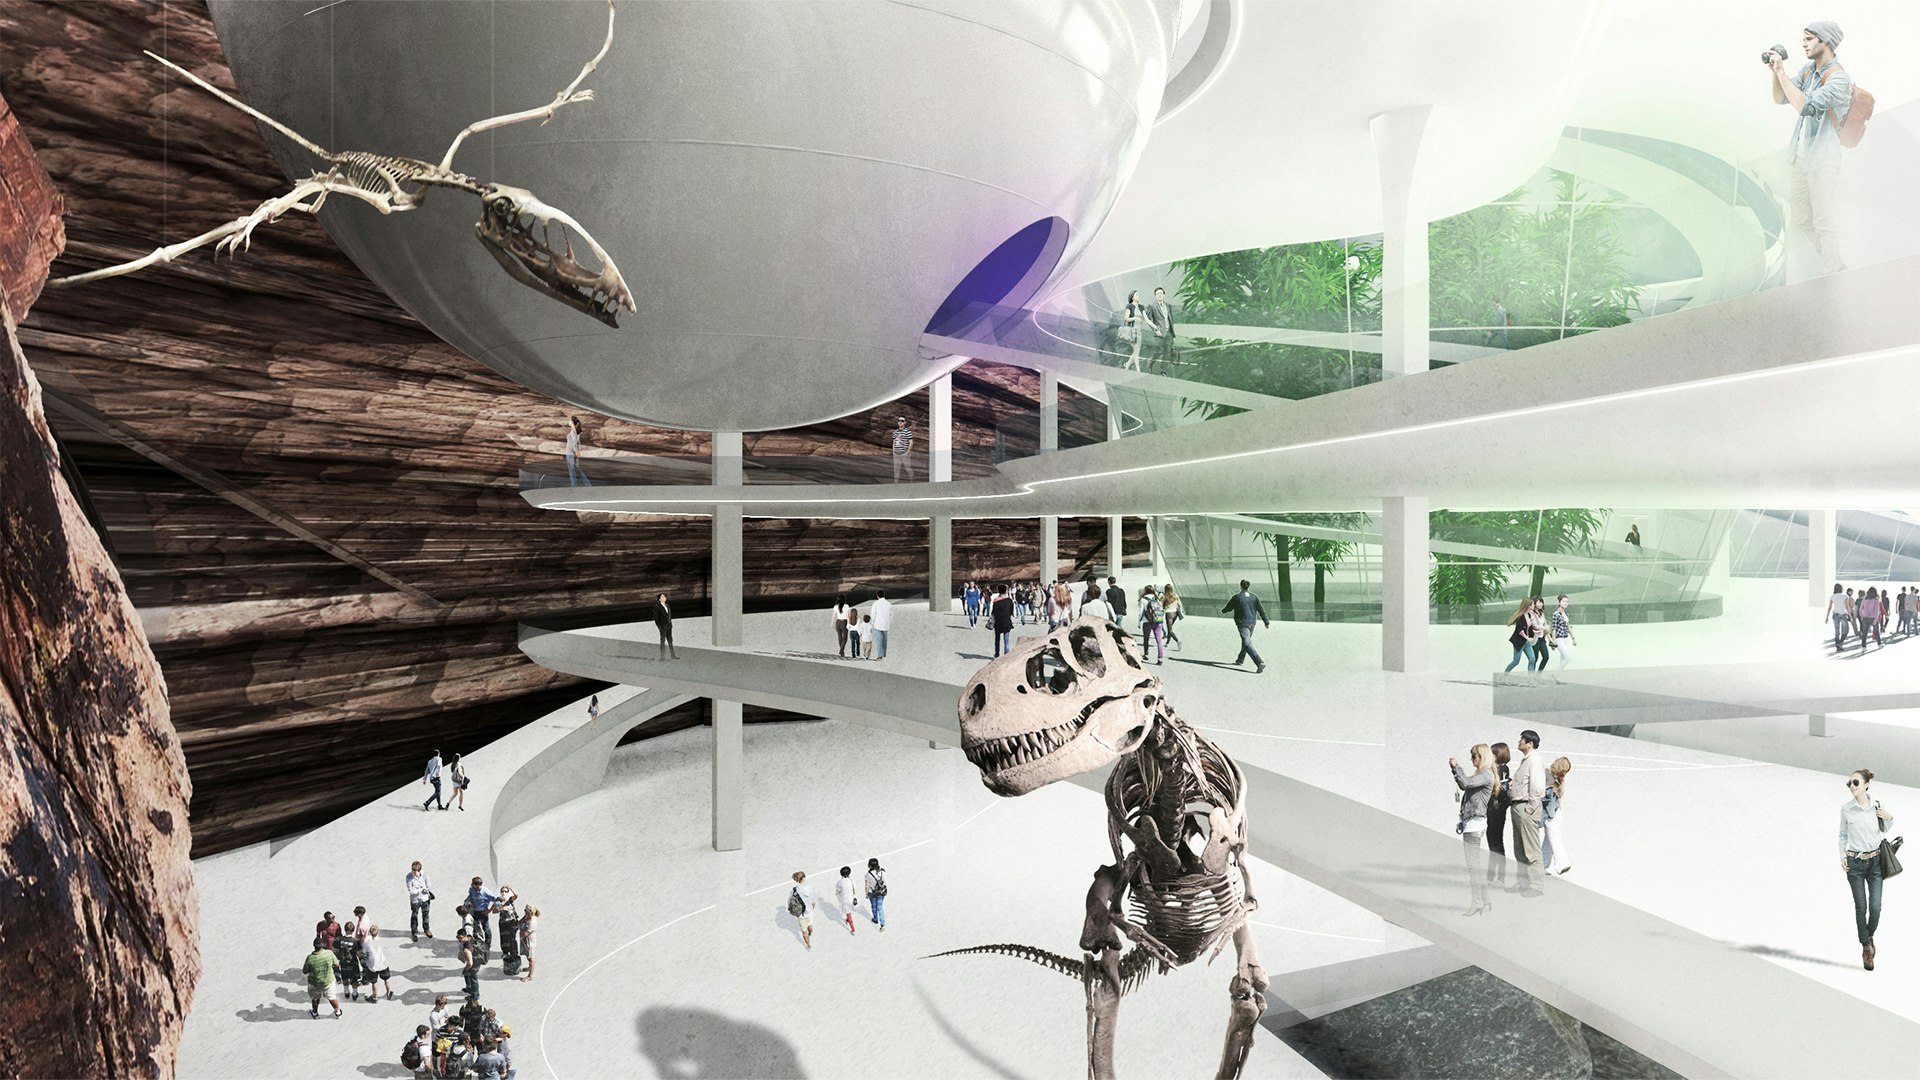 Shenzhen museum of natural history